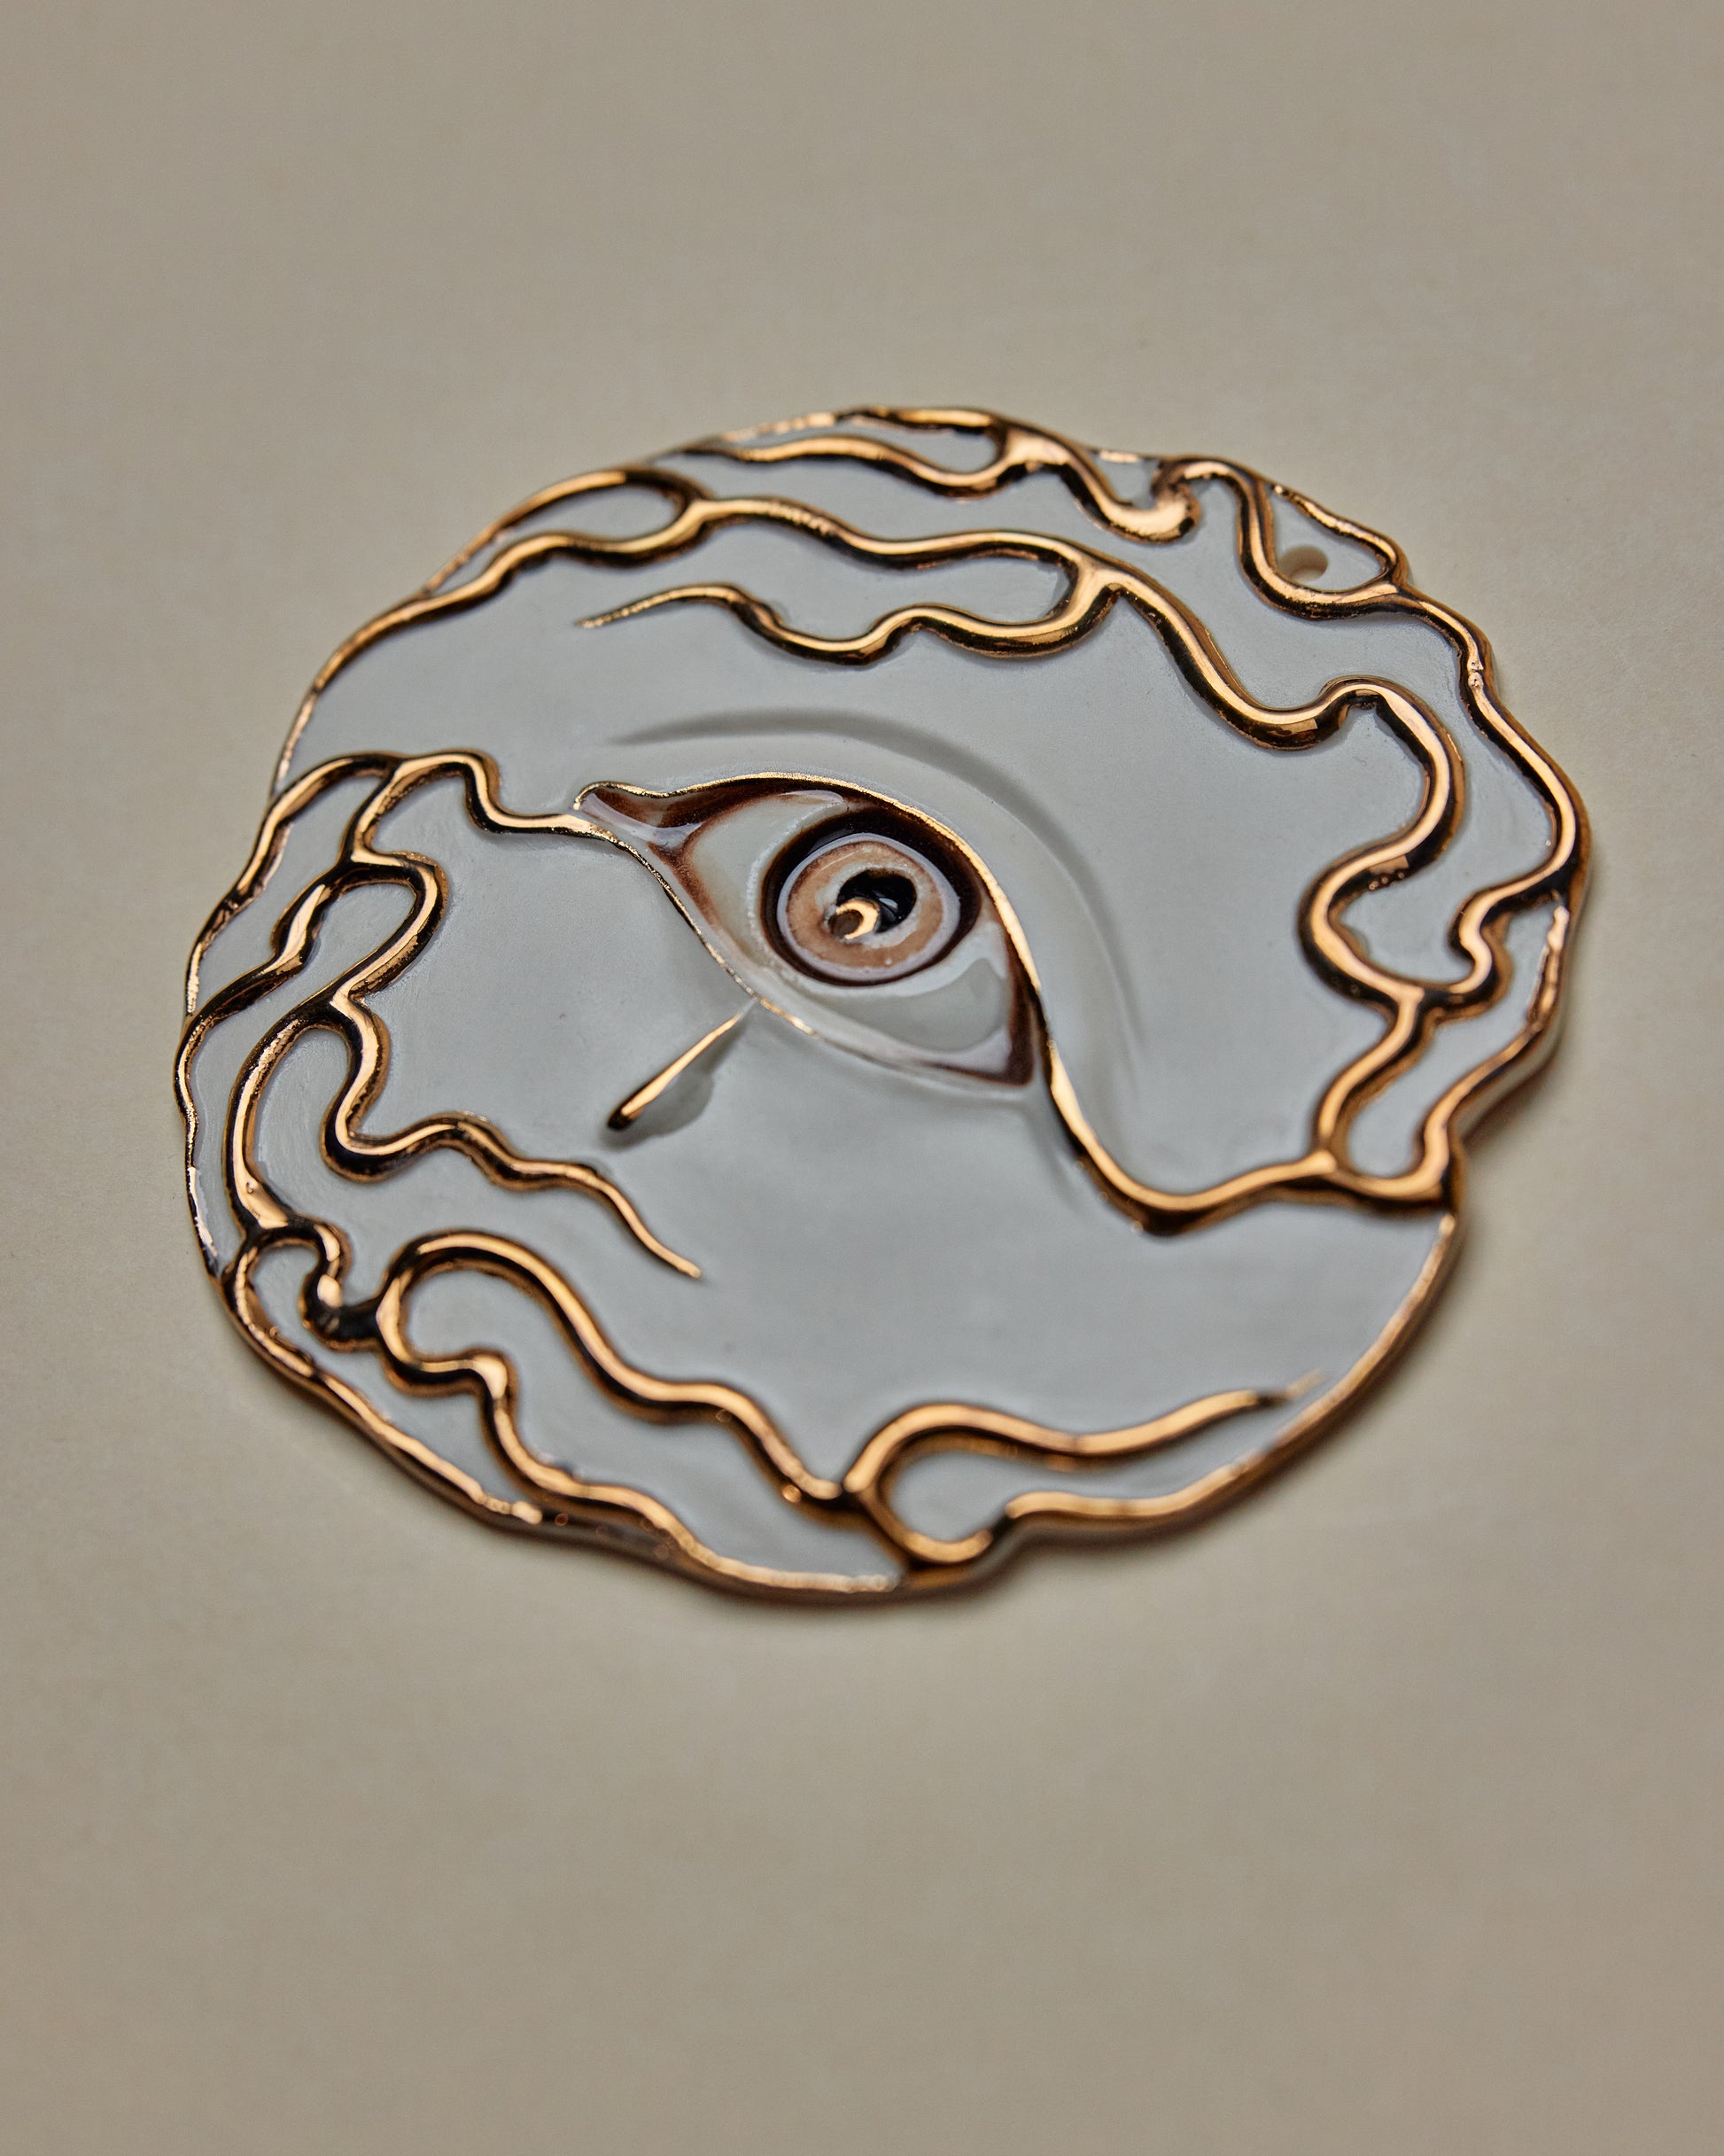 Flaming Eye Incense Holder / Wall Ornament 4 -  Hand crafted Porcelain Home Ornament. Circular ornament with Eye and Flame Border.